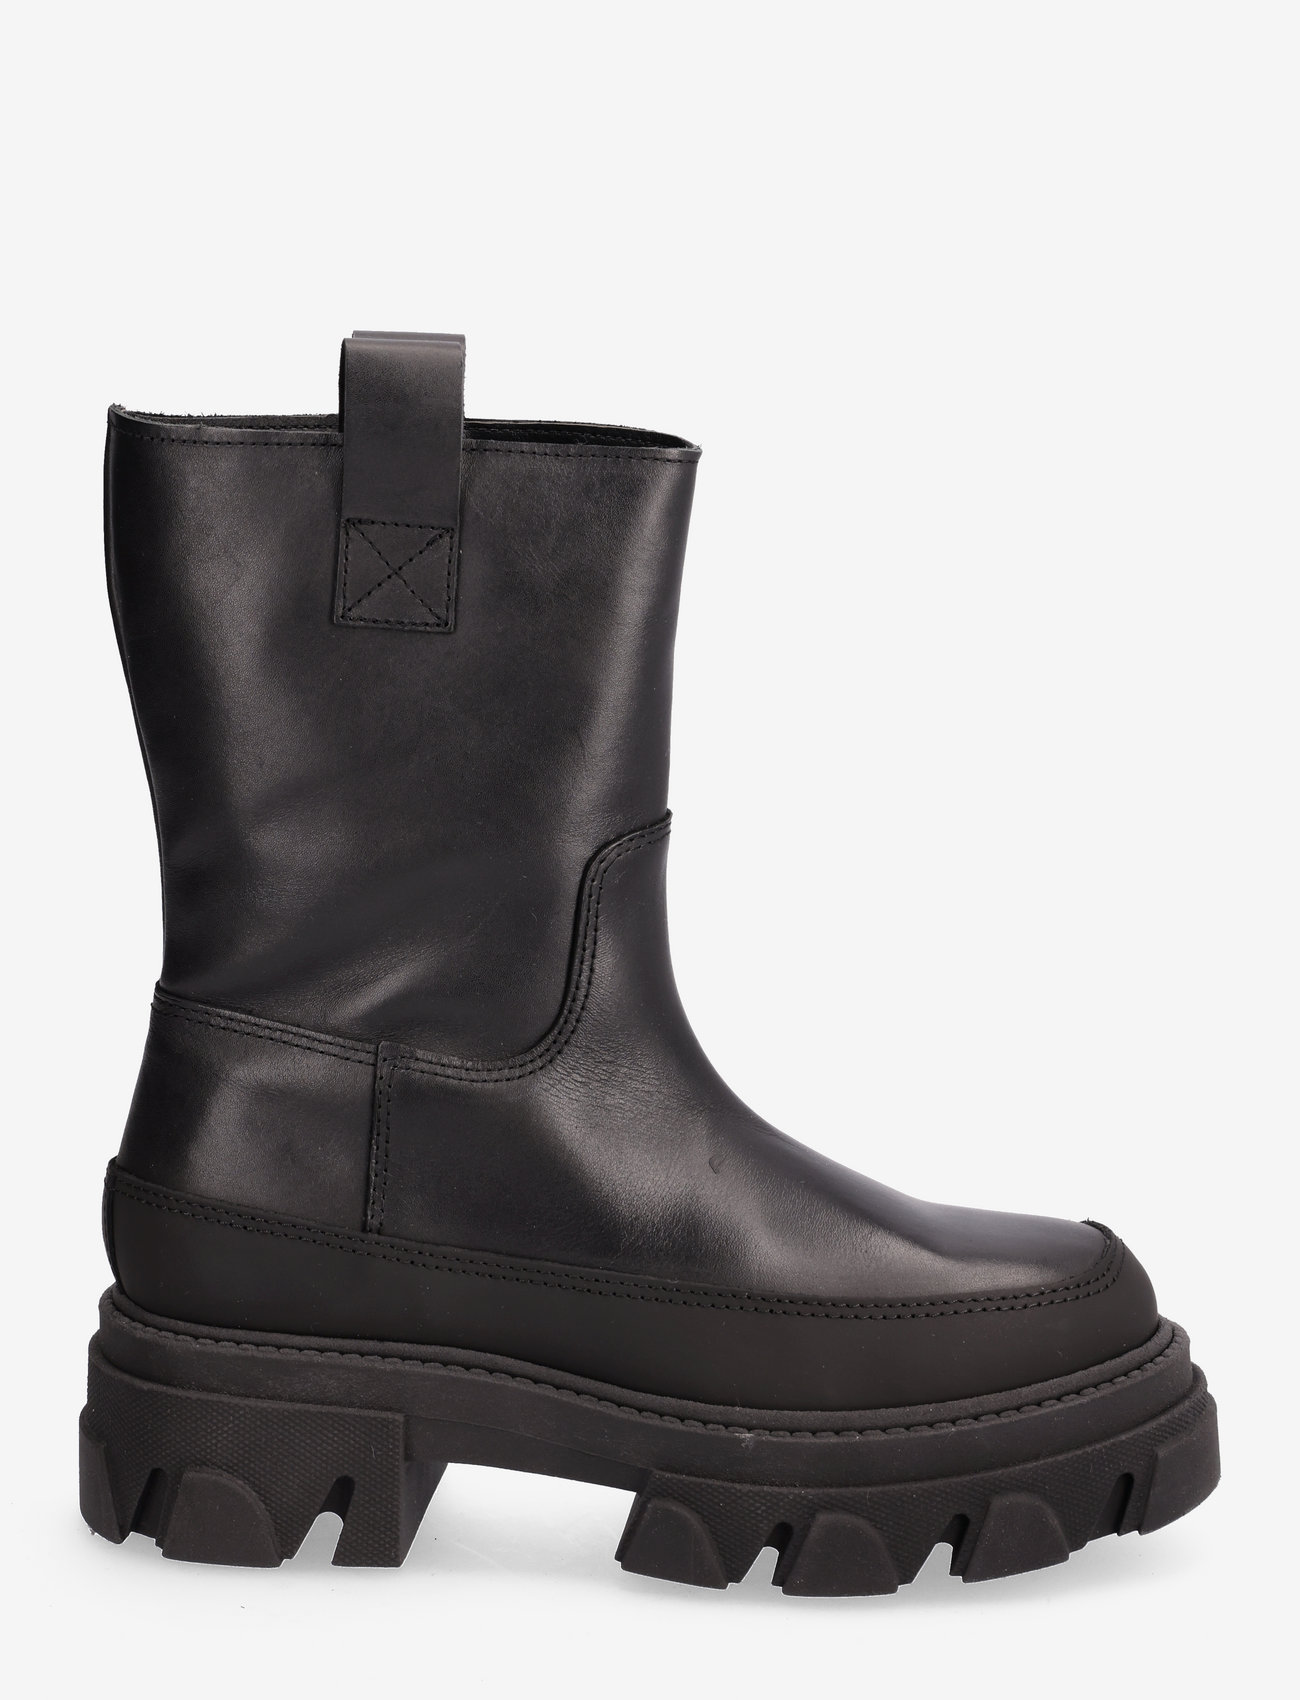 Sofie Schnoor - Boot - flat ankle boots - black - 1